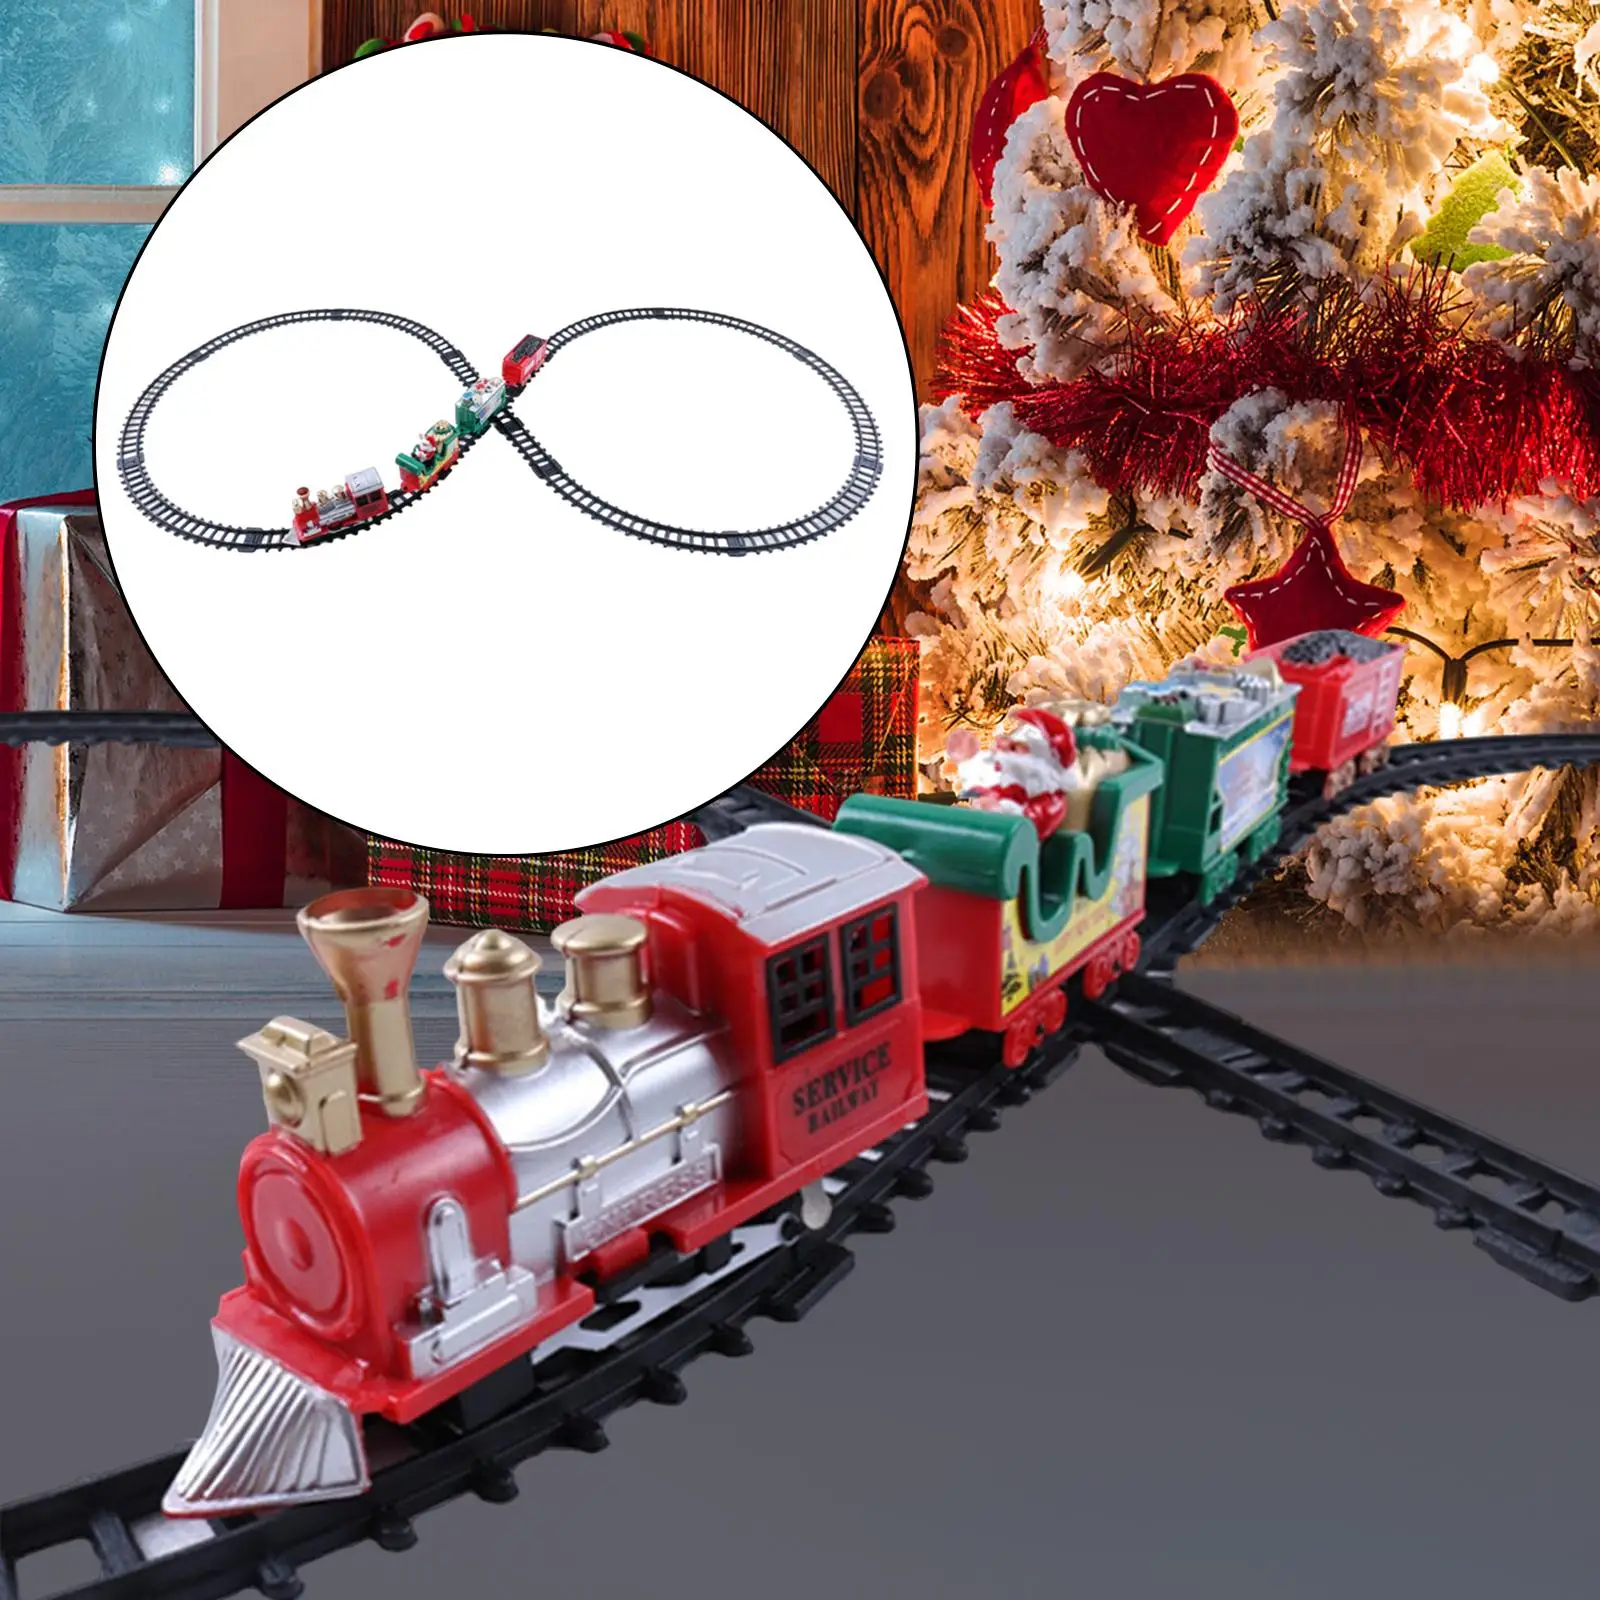 Electric Christmas Toy Train with Lights and Sounds Kid Toy Railway Track Set for Girls Boys Toddlers New Year Preschool Gifts